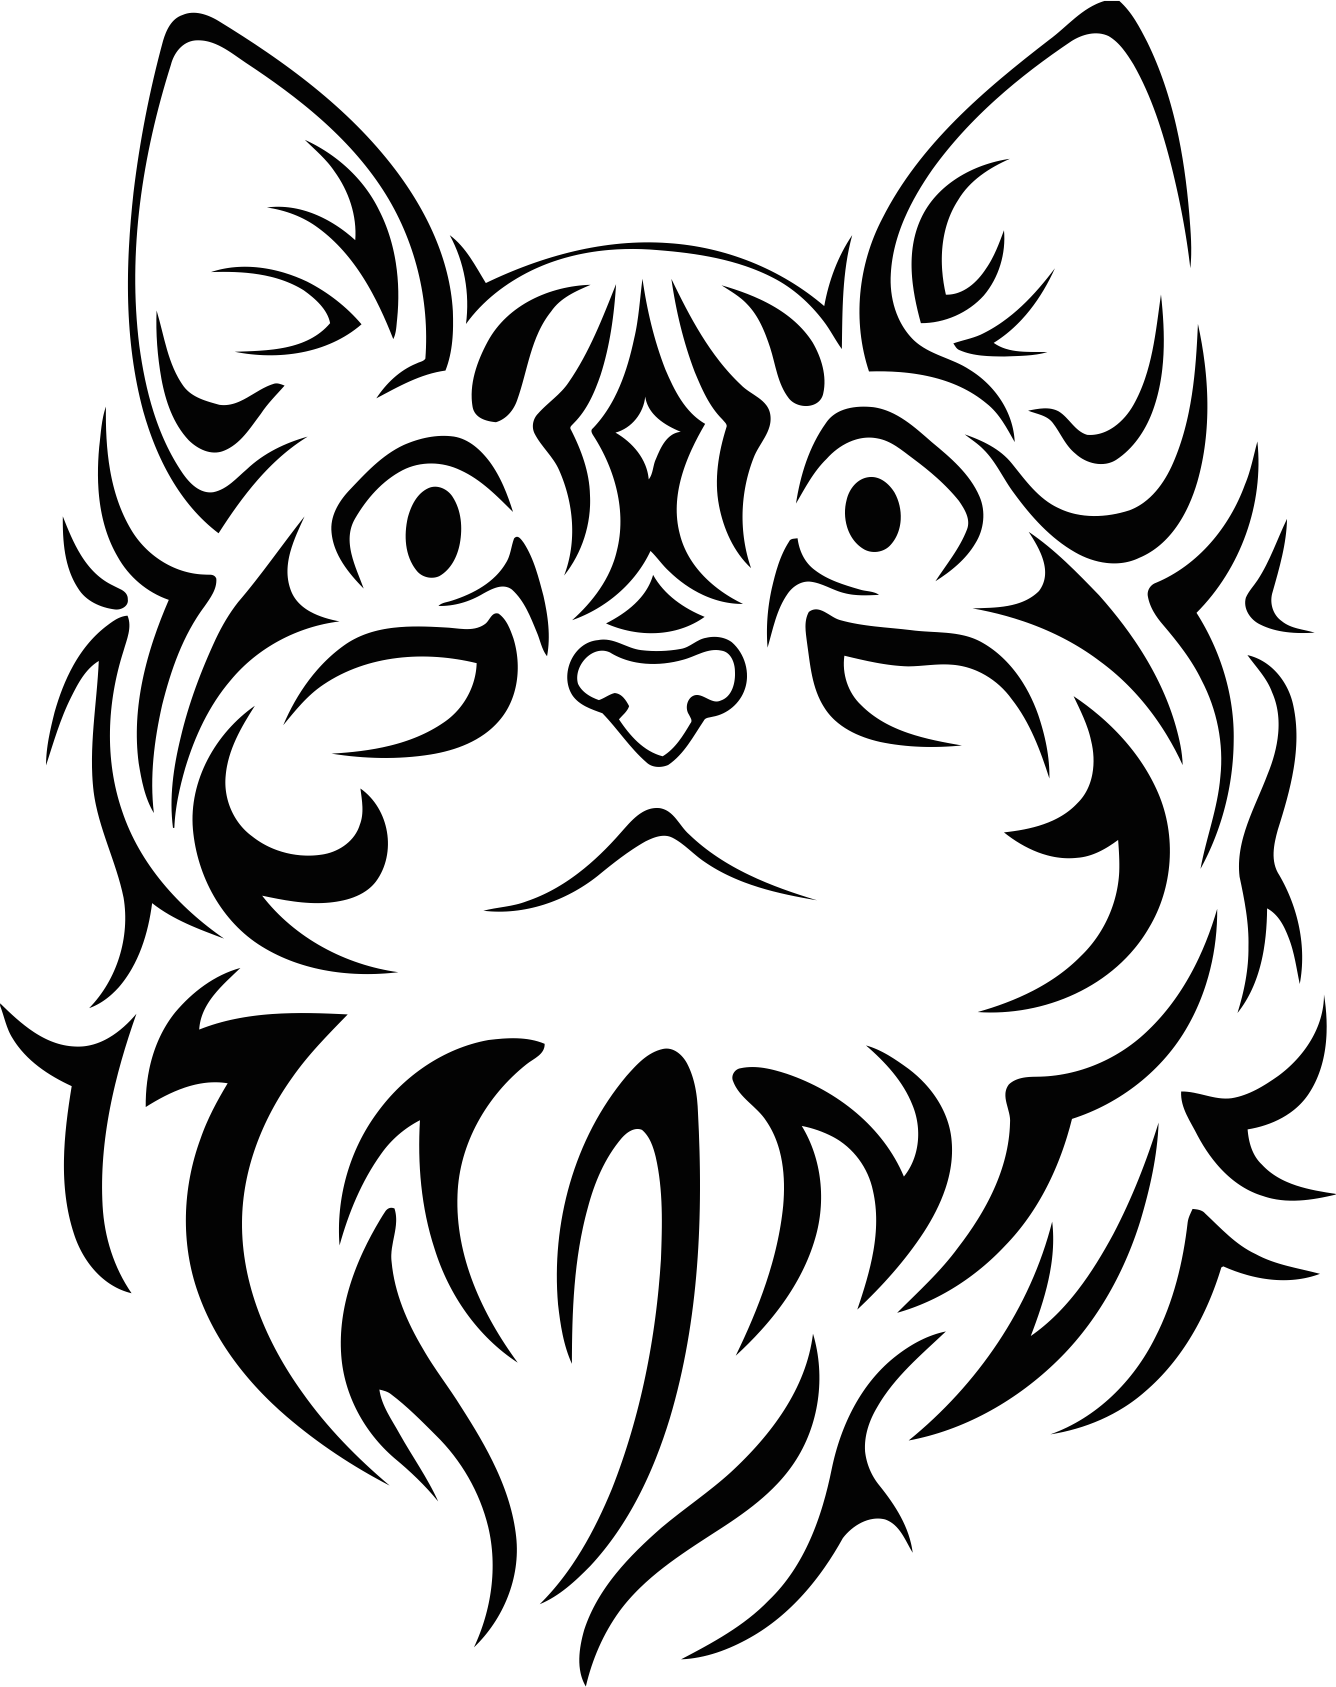 Download Pretty Tribal Cat Face Silhouette Vector Free Vector cdr Download - 3axis.co